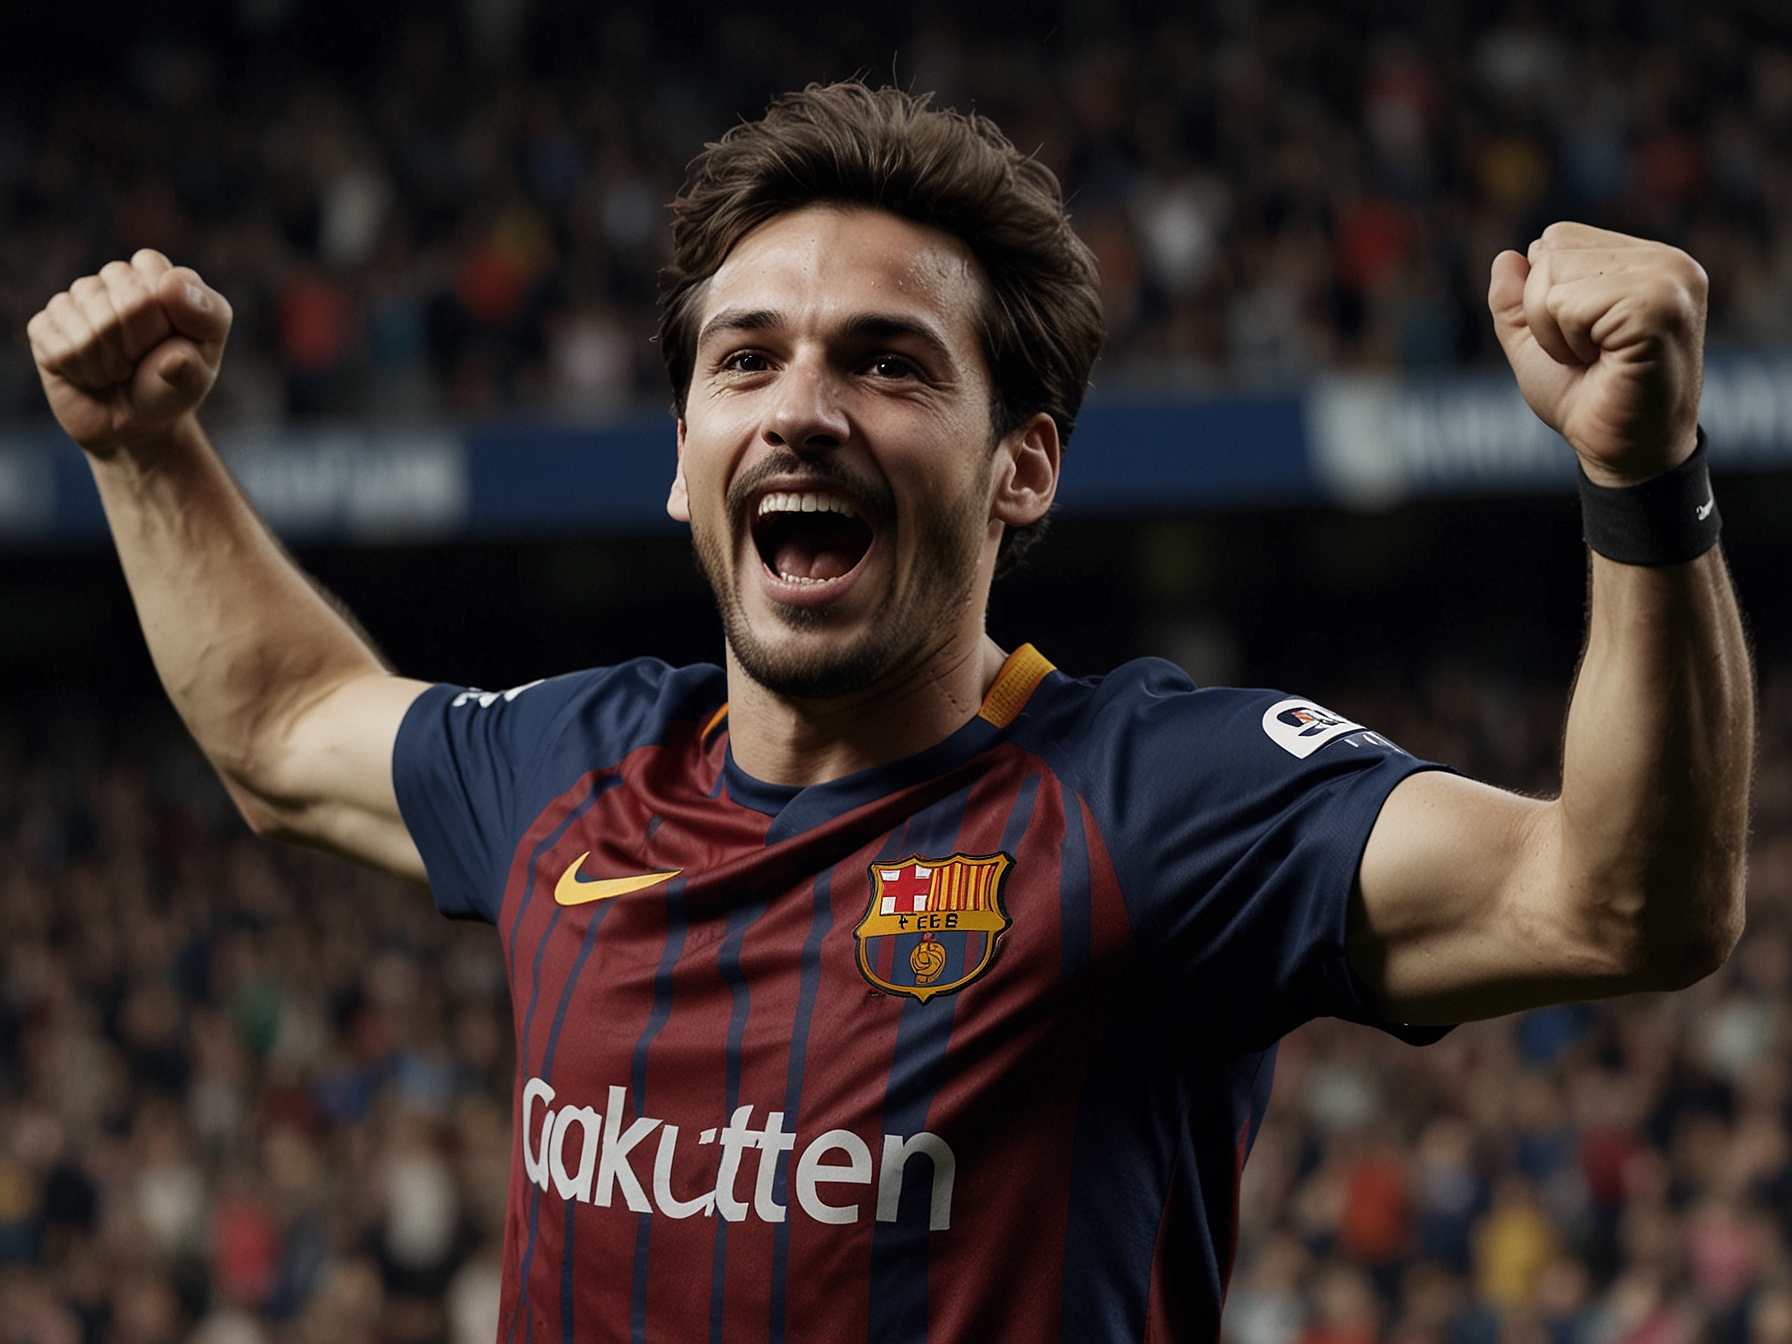 An image of Marc Guiu celebrating a goal during a match for Barcelona, highlighting his impressive debut season where he scored two goals in seven appearances.